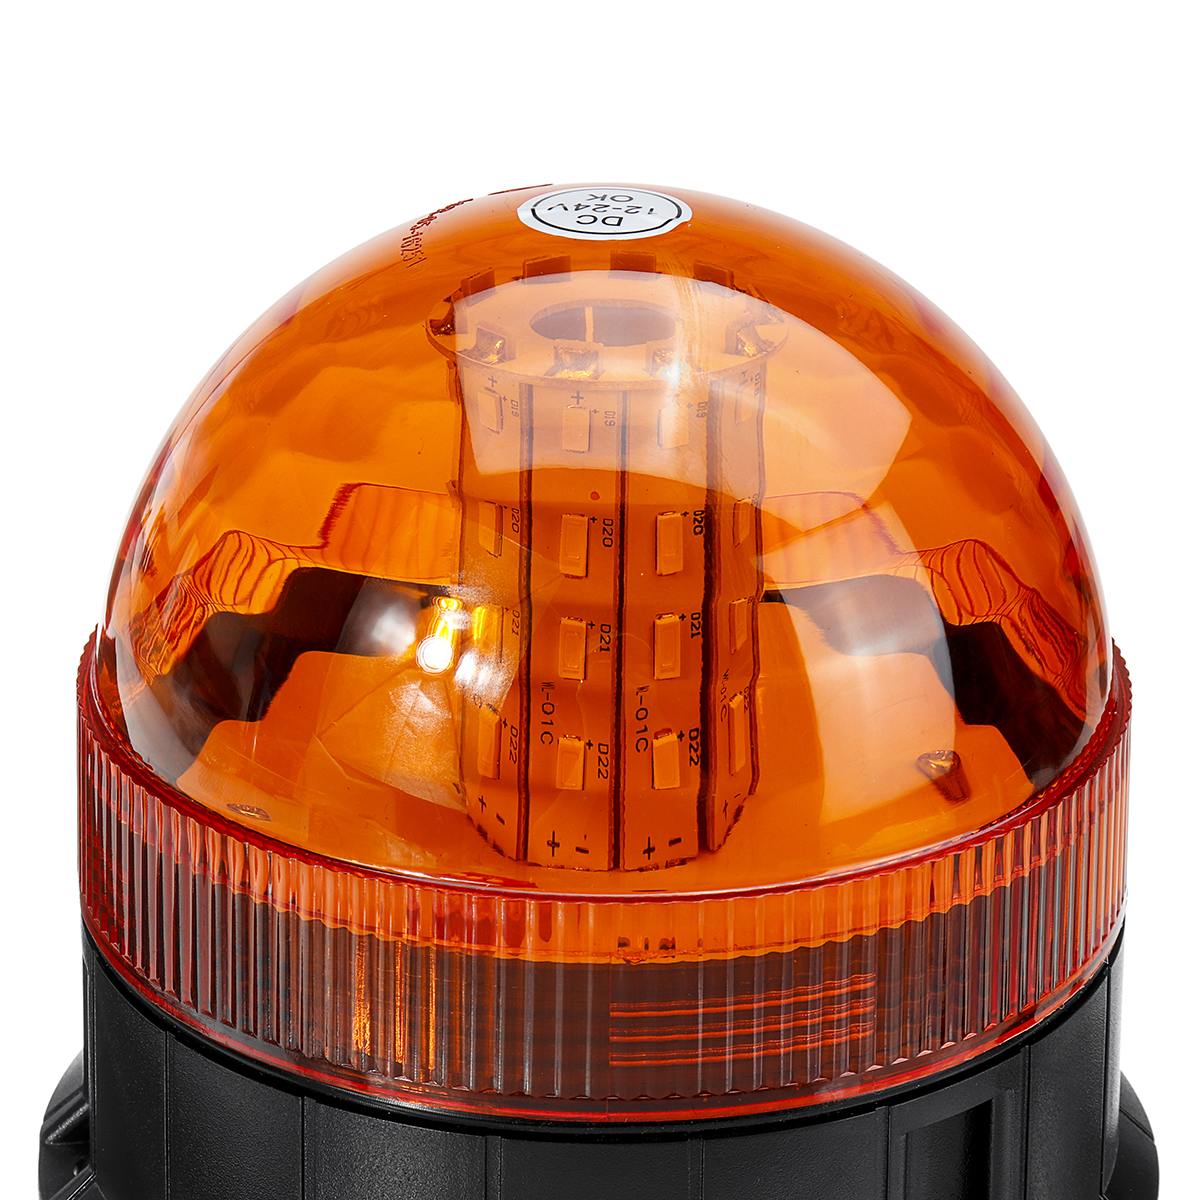 Find DC12 24V 40LED Magnetic Roof Rotating Flash Amber Beacon Strobe Tractor Warning Signal Light for Sale on Gipsybee.com with cryptocurrencies